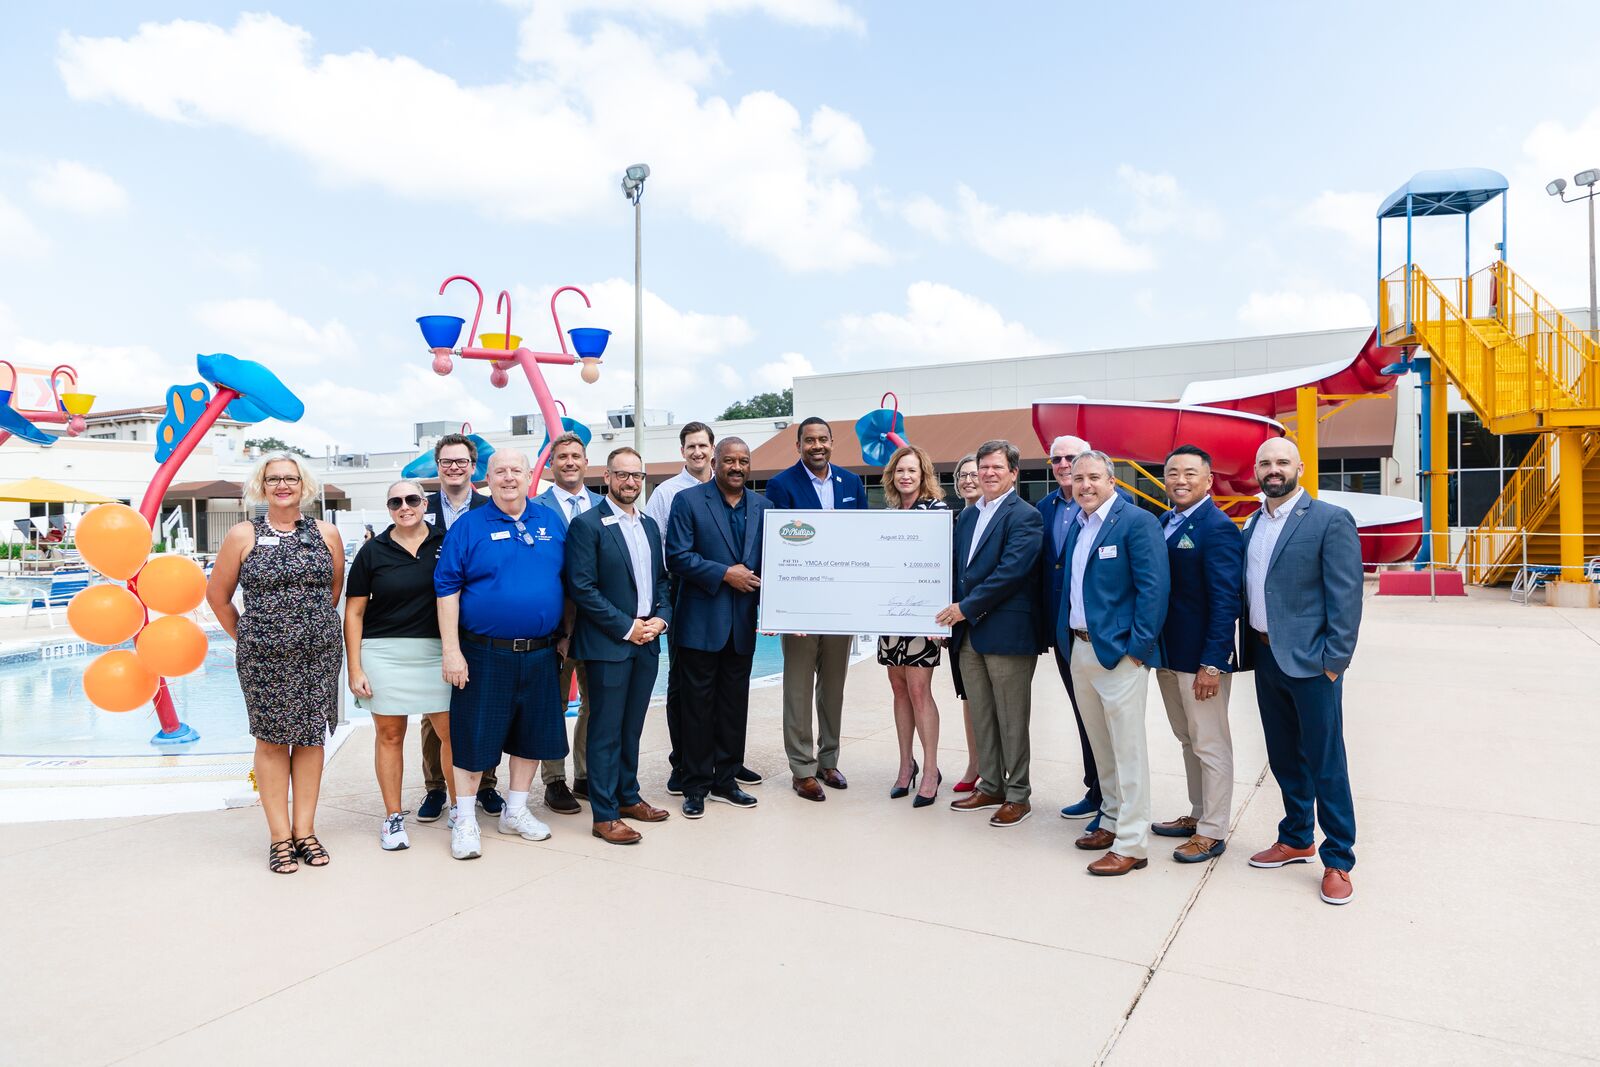 Photo of YMCA leadership and Dr Phillips Charities leadership presenting $2 million check at the Dr. P. Phillips YMCA pool